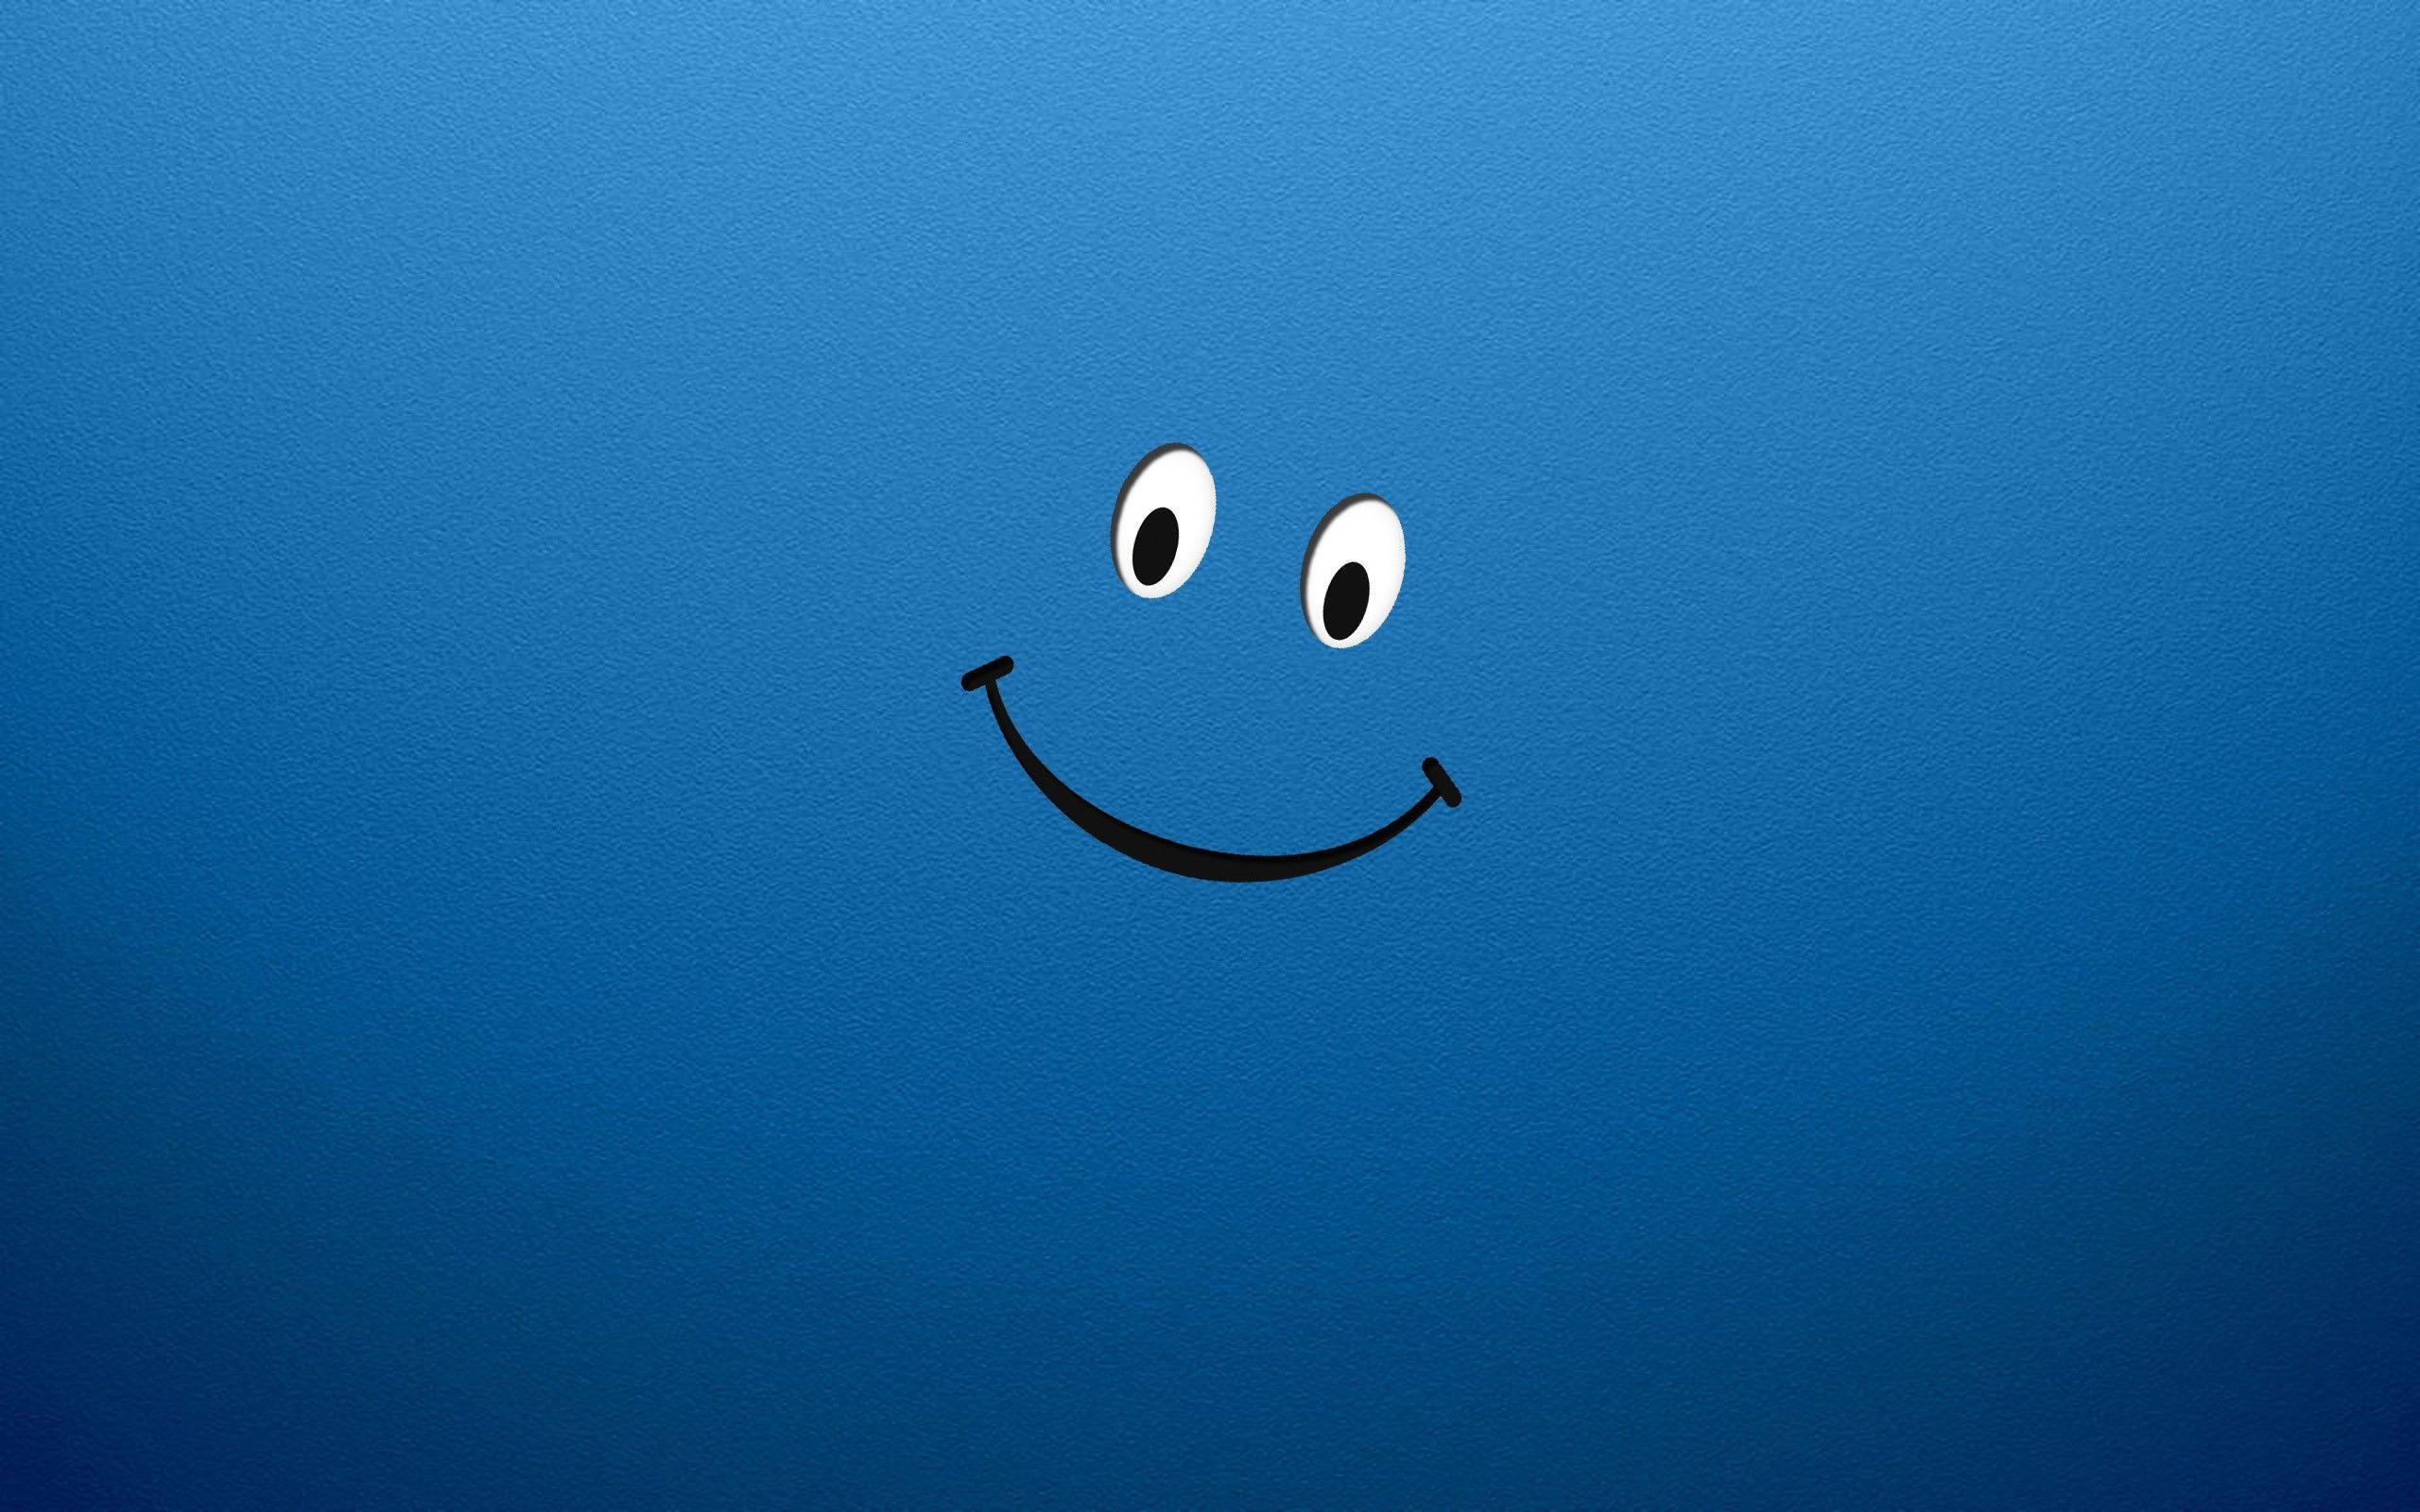 Smiley Face Full HD Image Free Download. Beautiful image HD